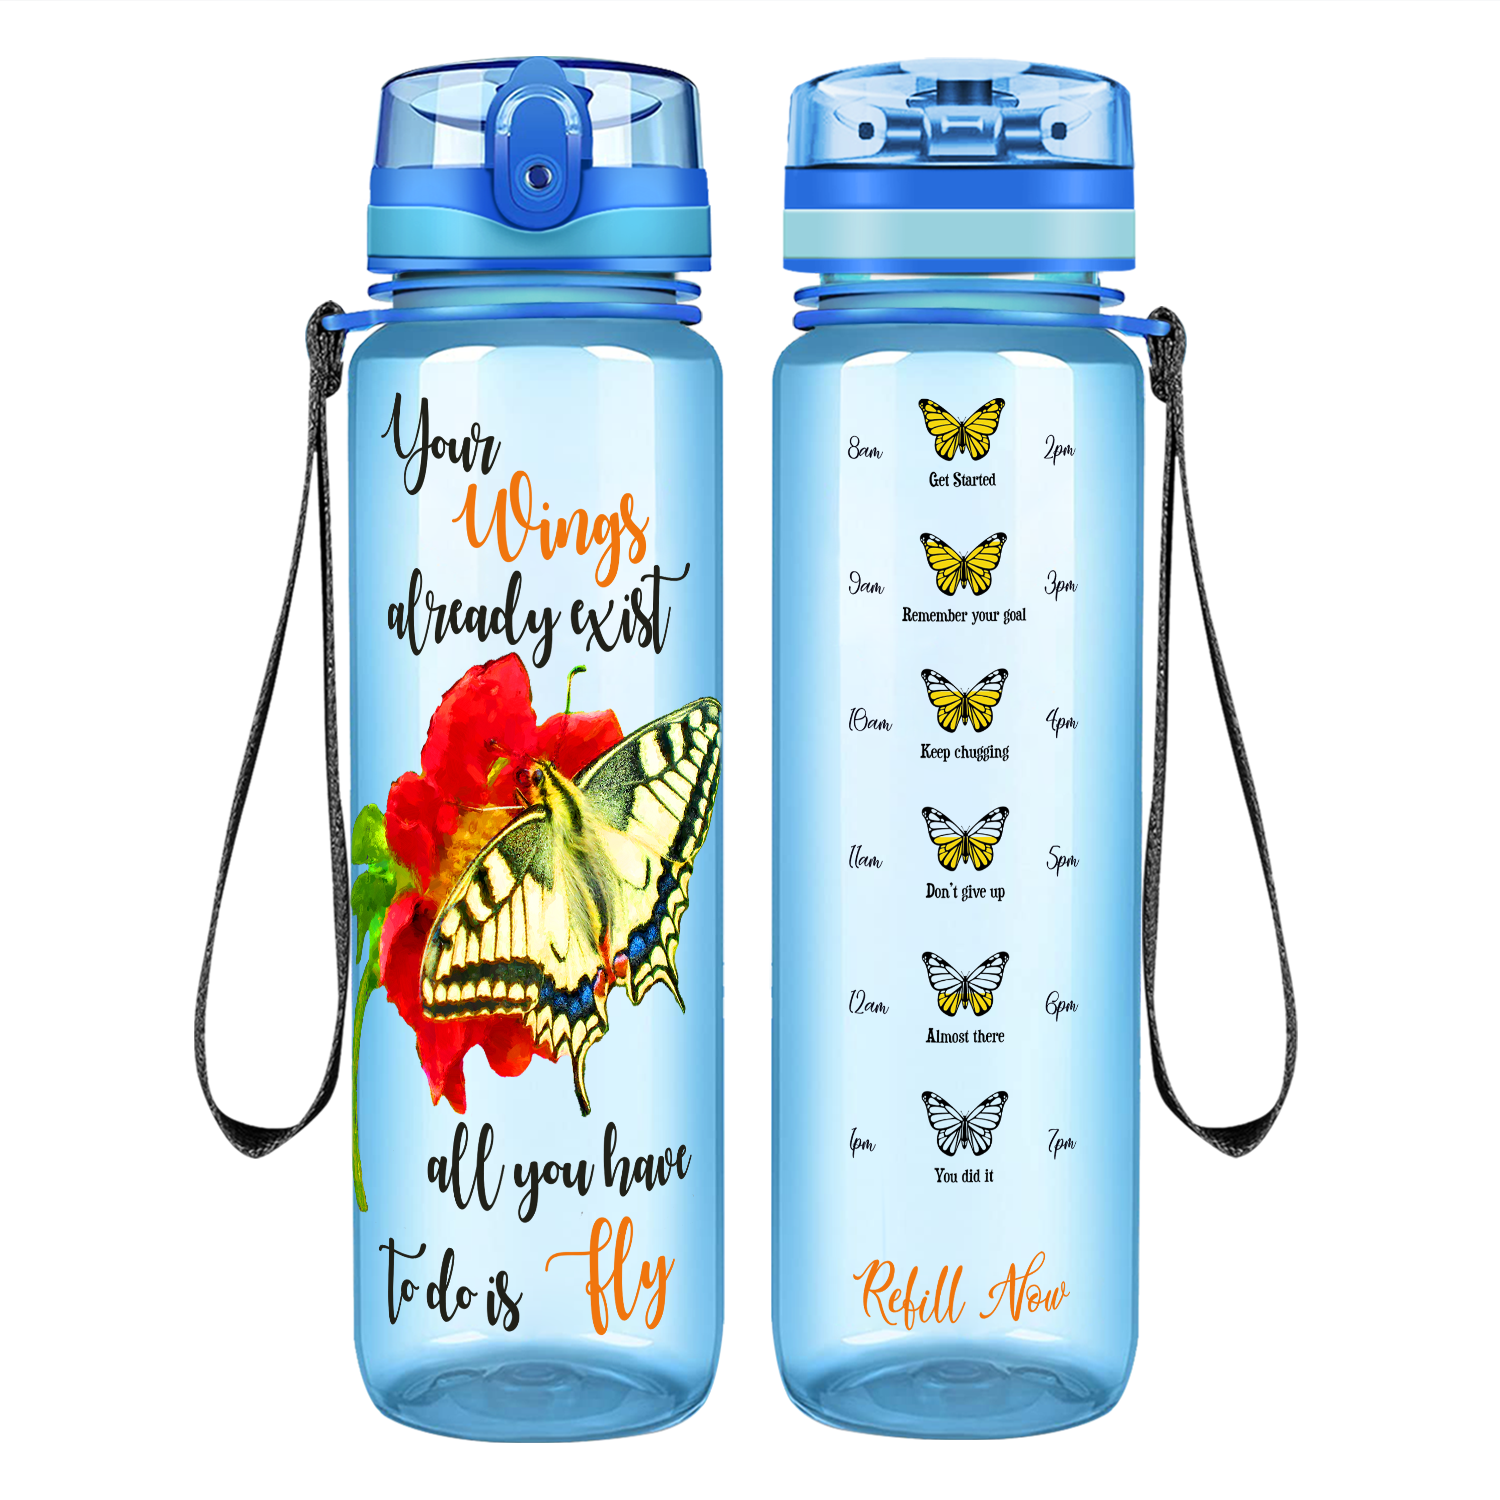 Your Wings Already Exist on 32 oz Motivational Tracking Water Bottle